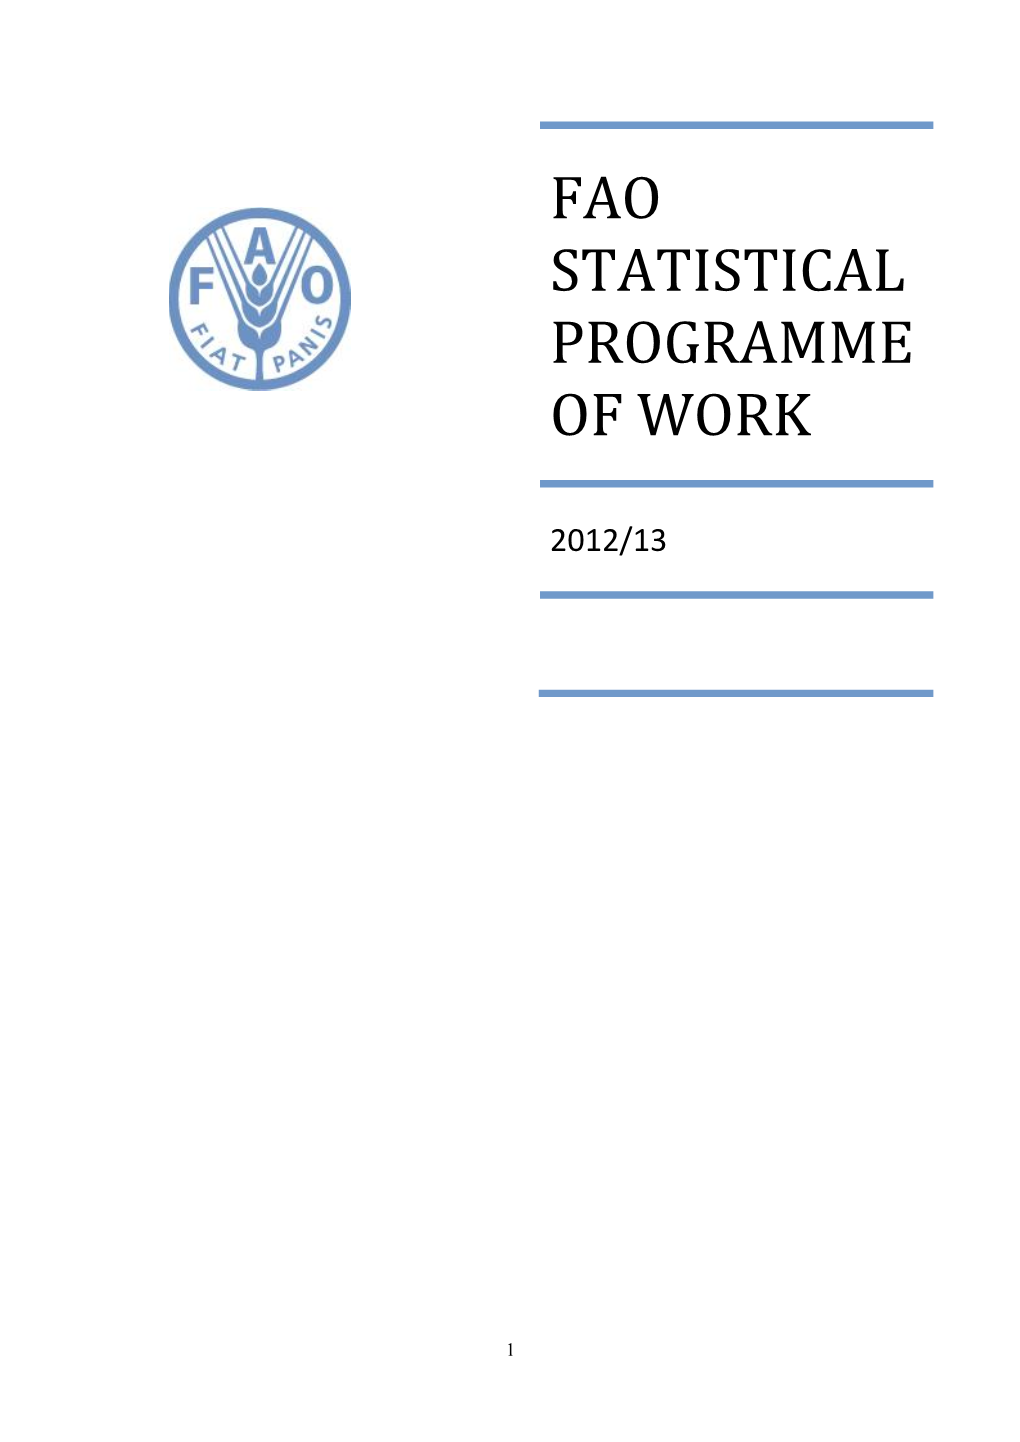 FAO Statistical Programme of Work 2012/2013